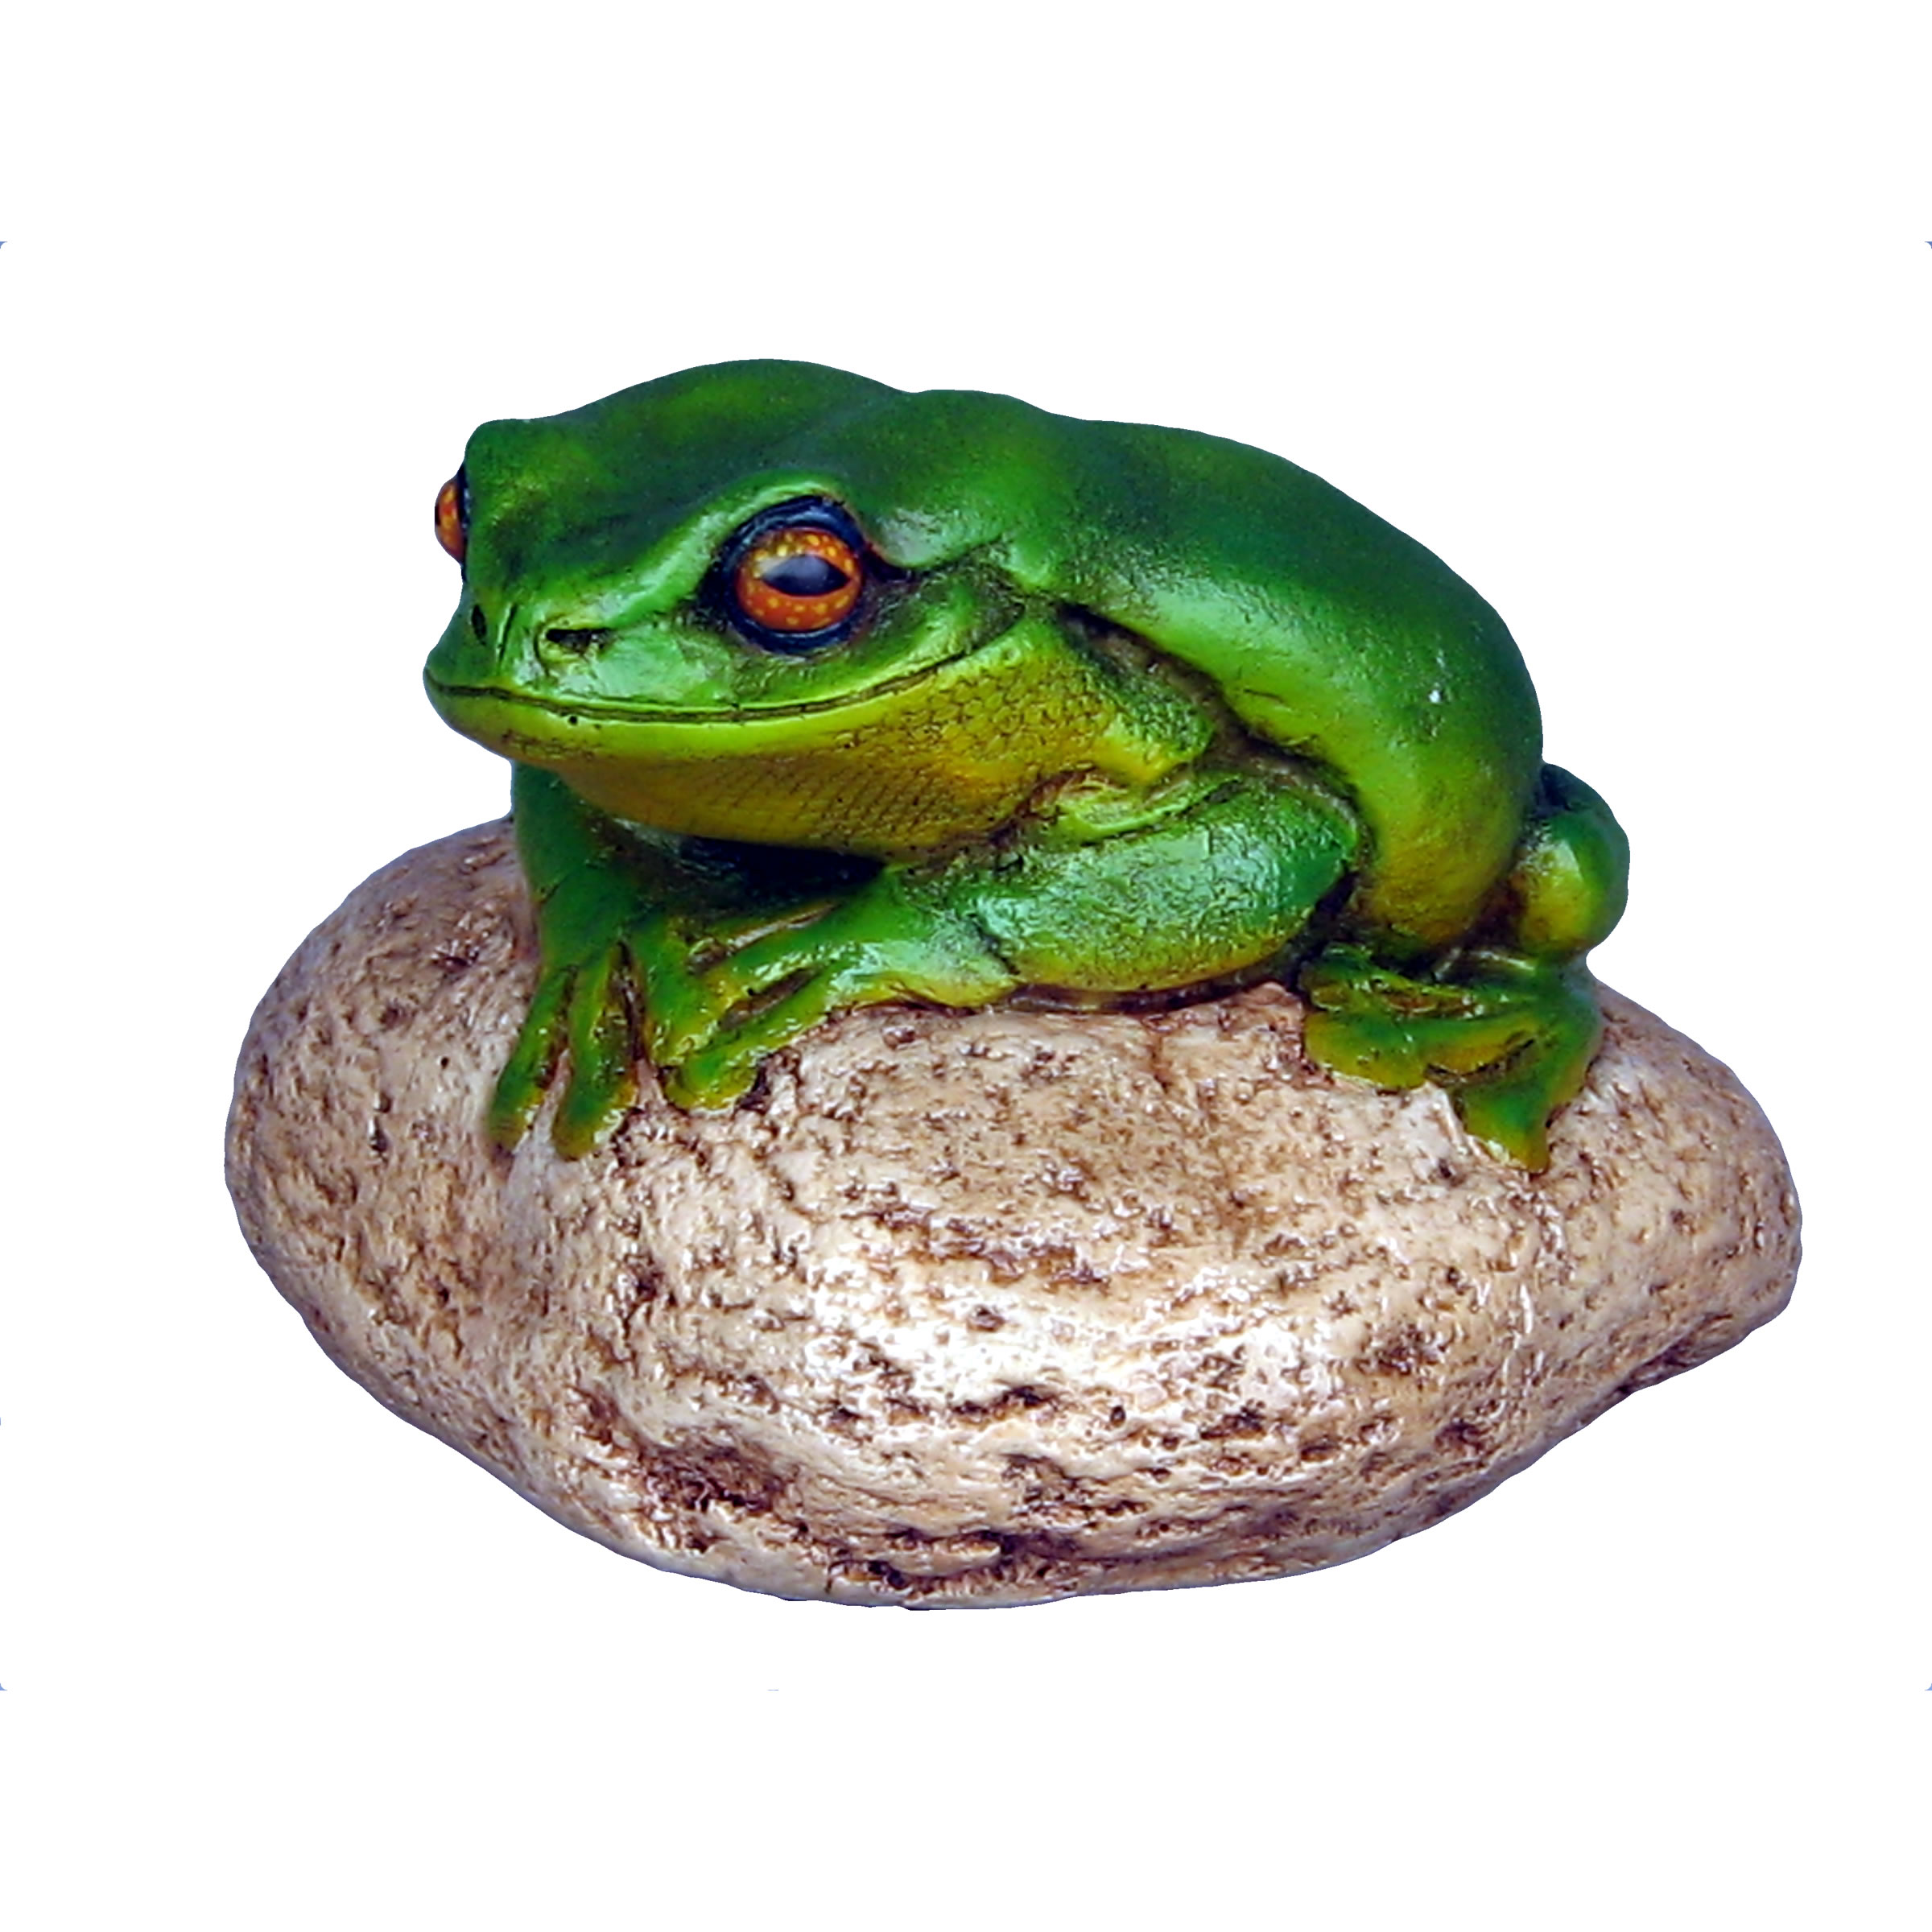 Frog On a Rock Figurine Statue - Small